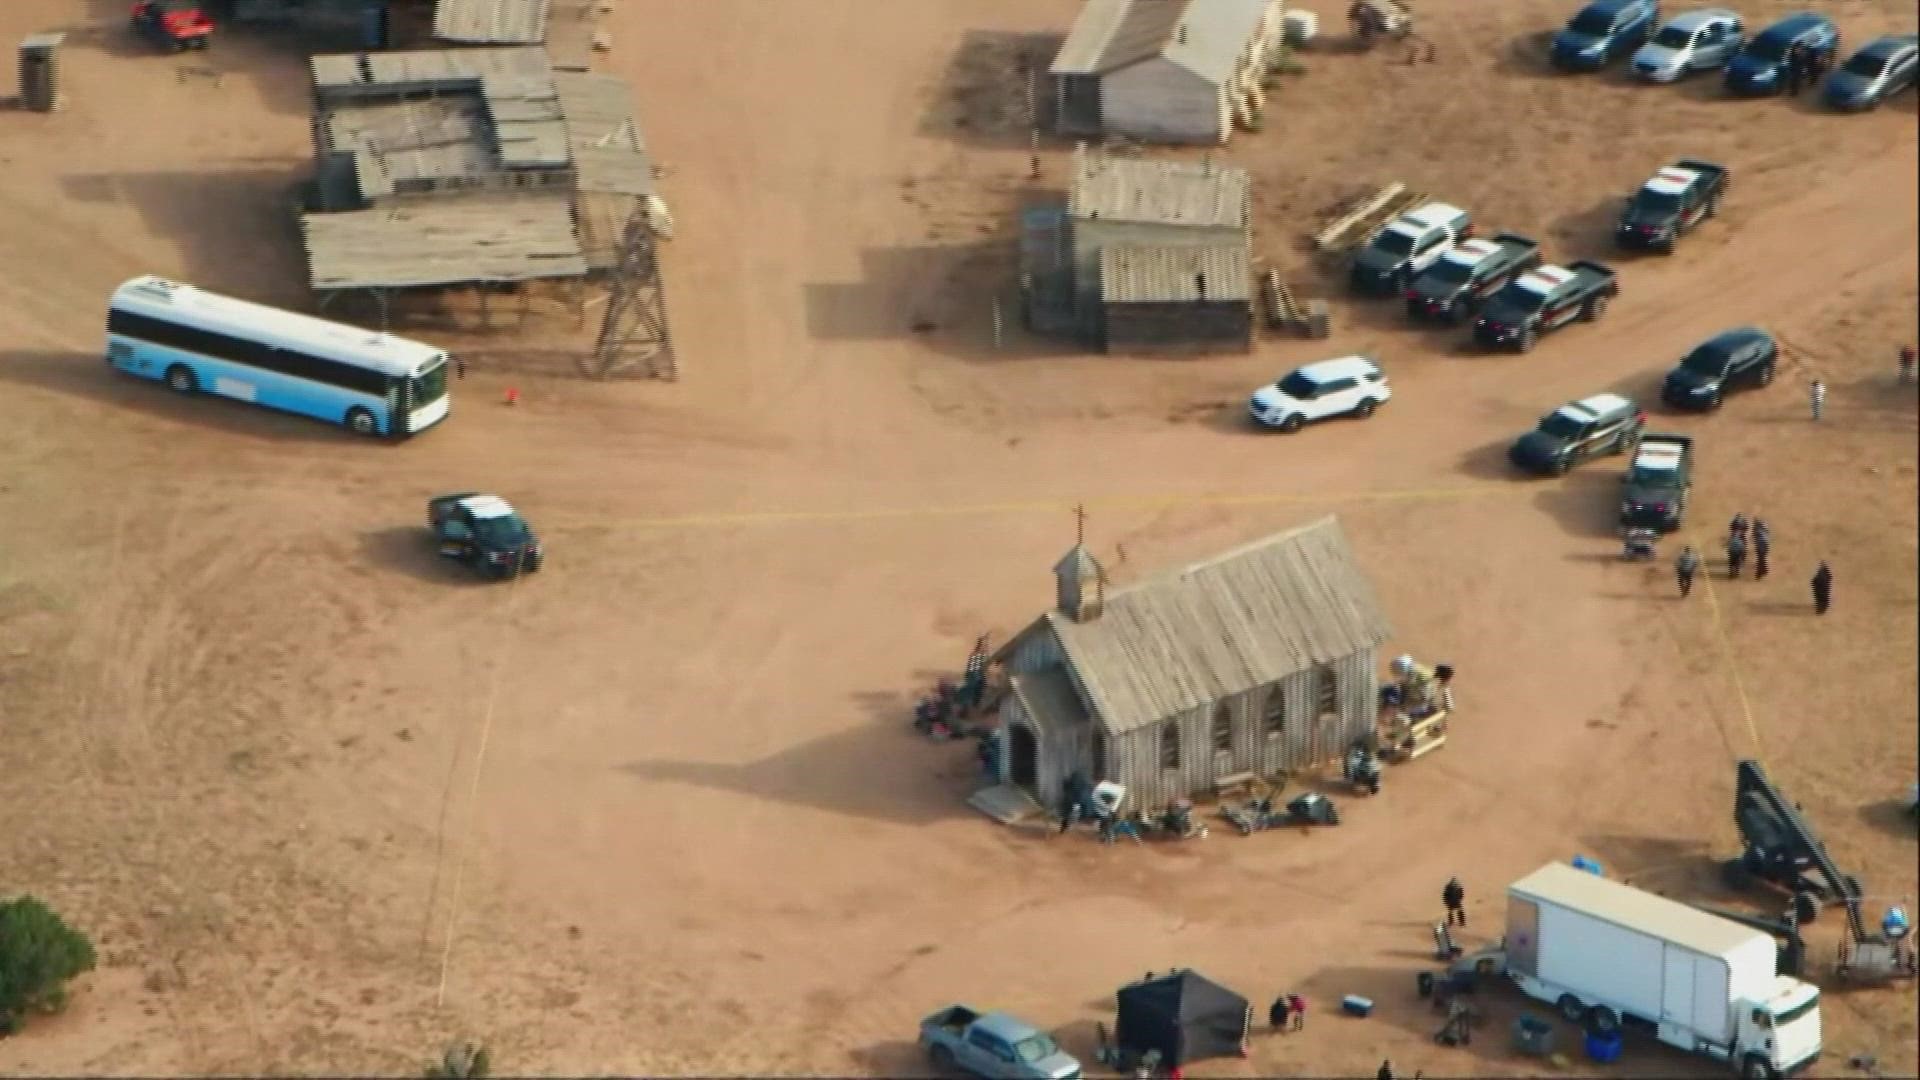 A woman was killed and a man injured after they were shot by a prop firearm on the set of an Alec Baldwin film near Santa Fe.